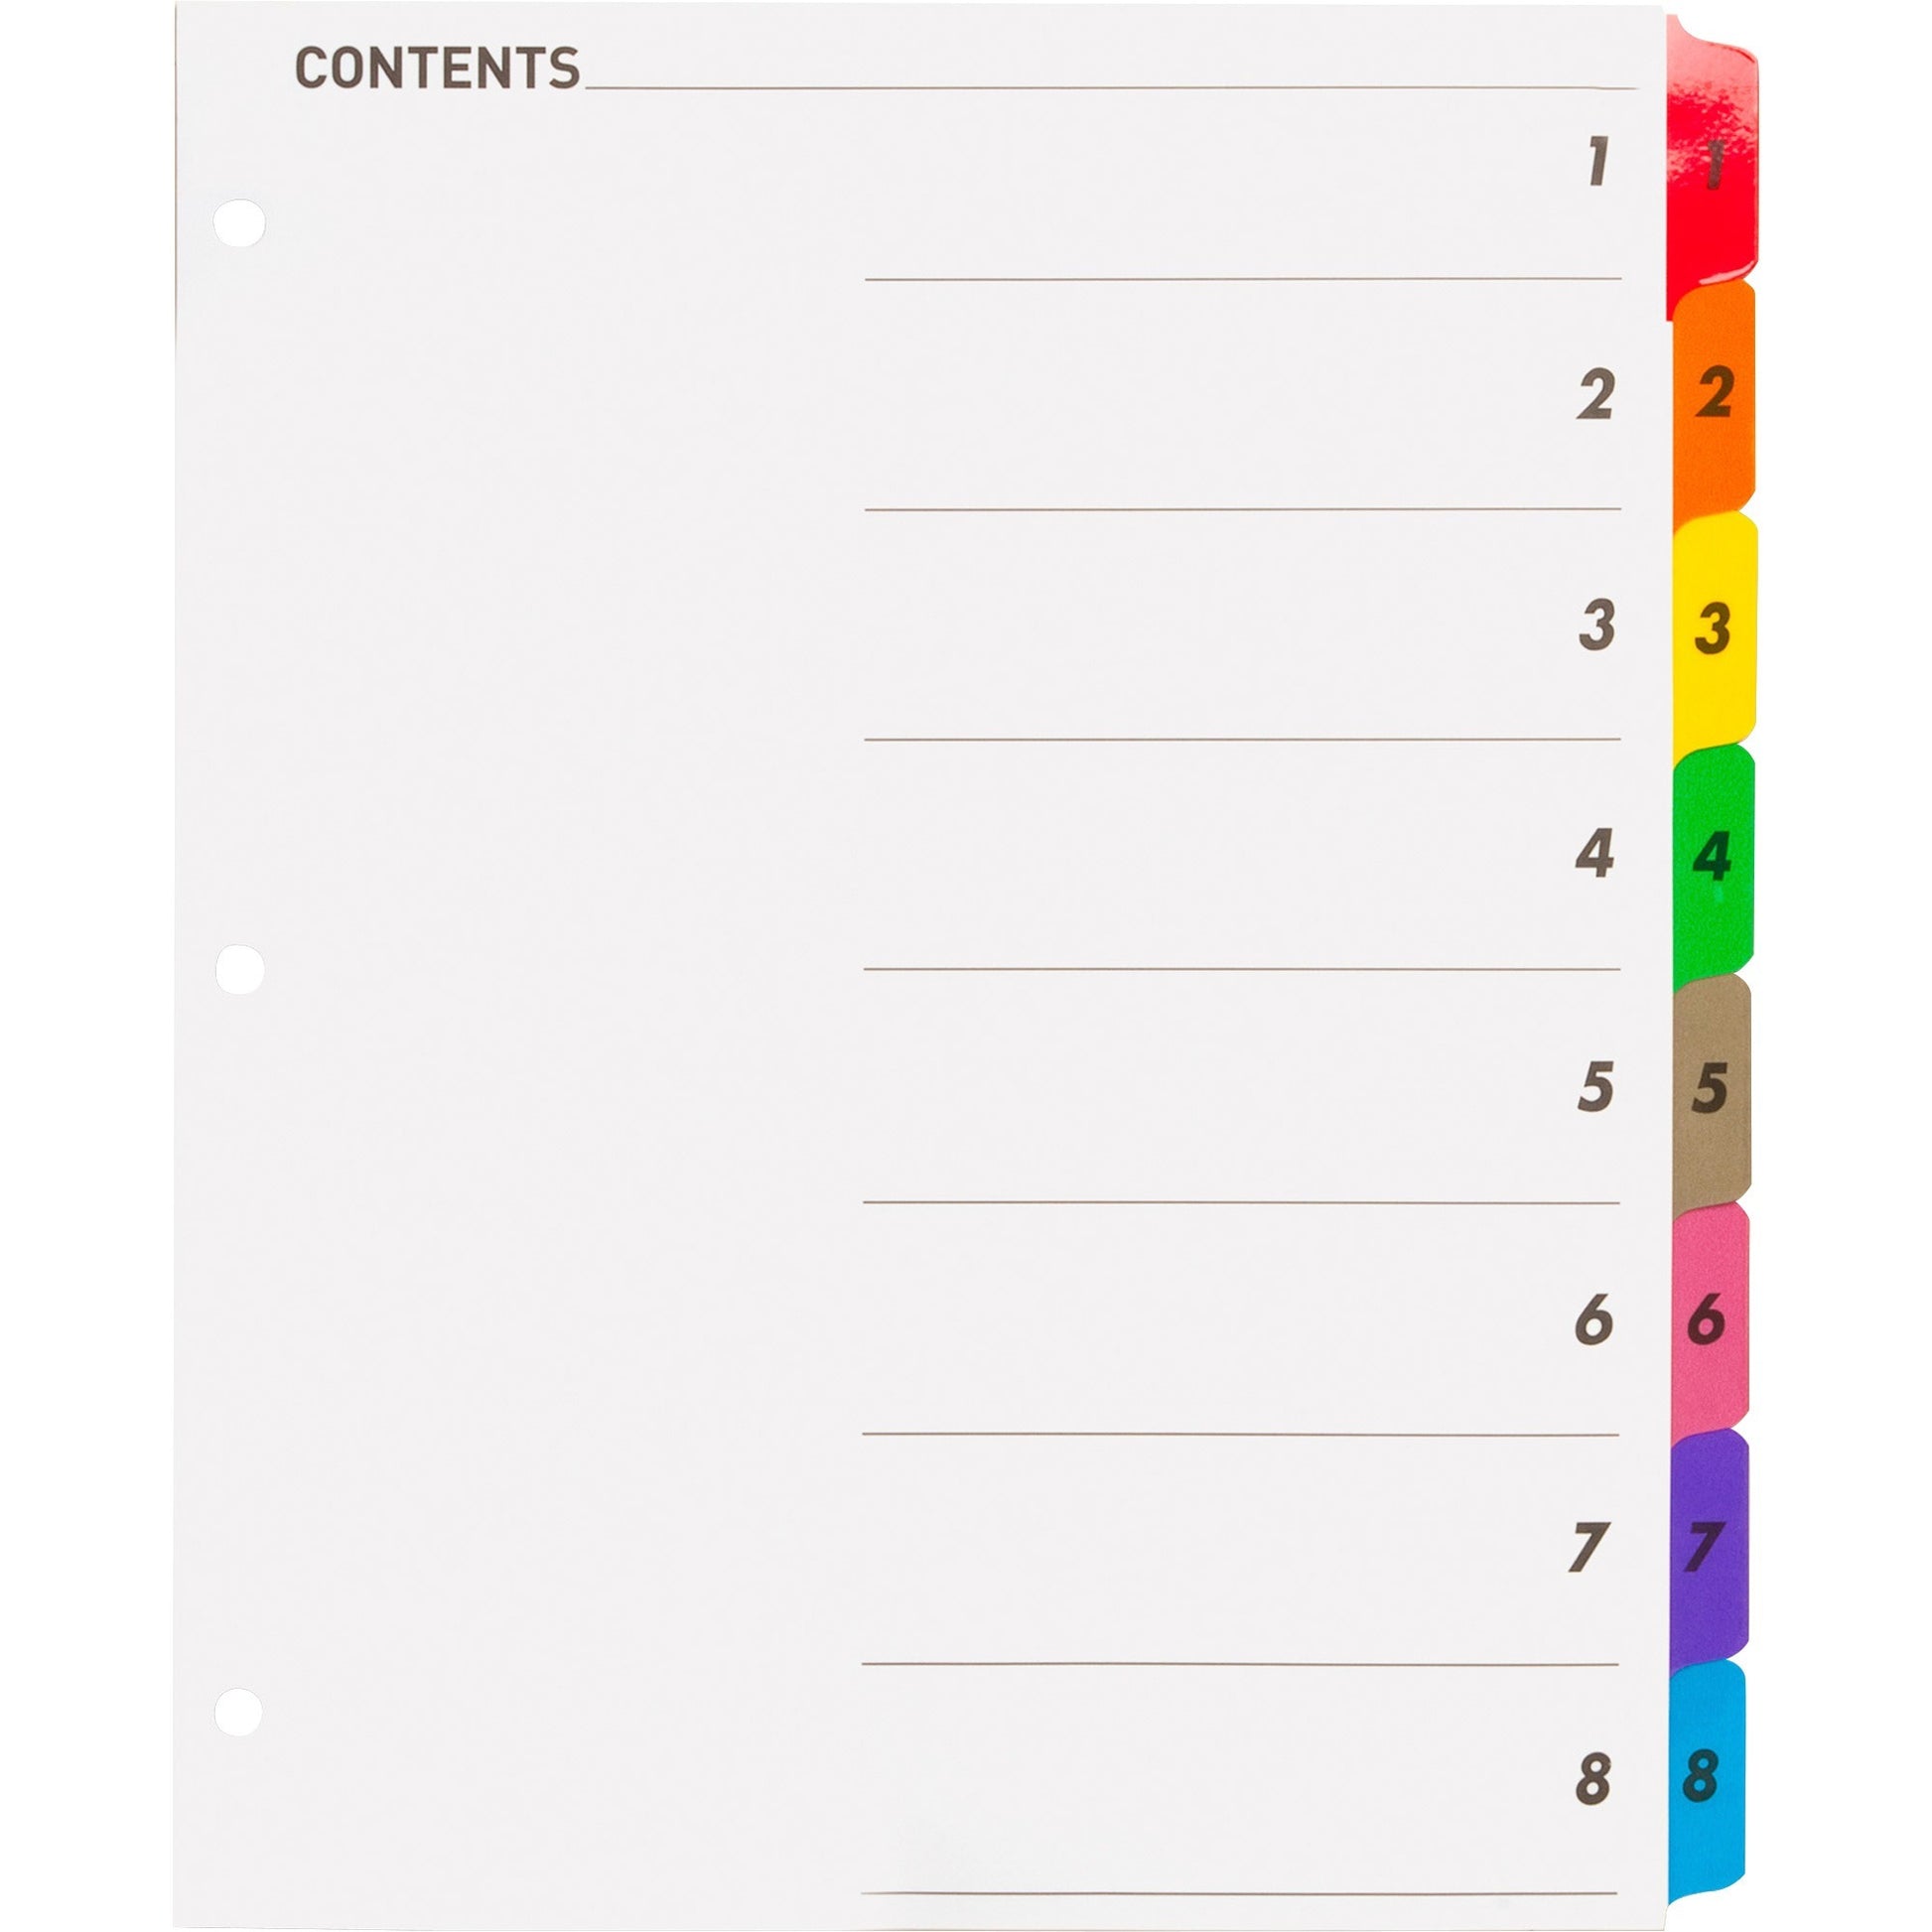 Business Source Table of Content Quick Index Dividers